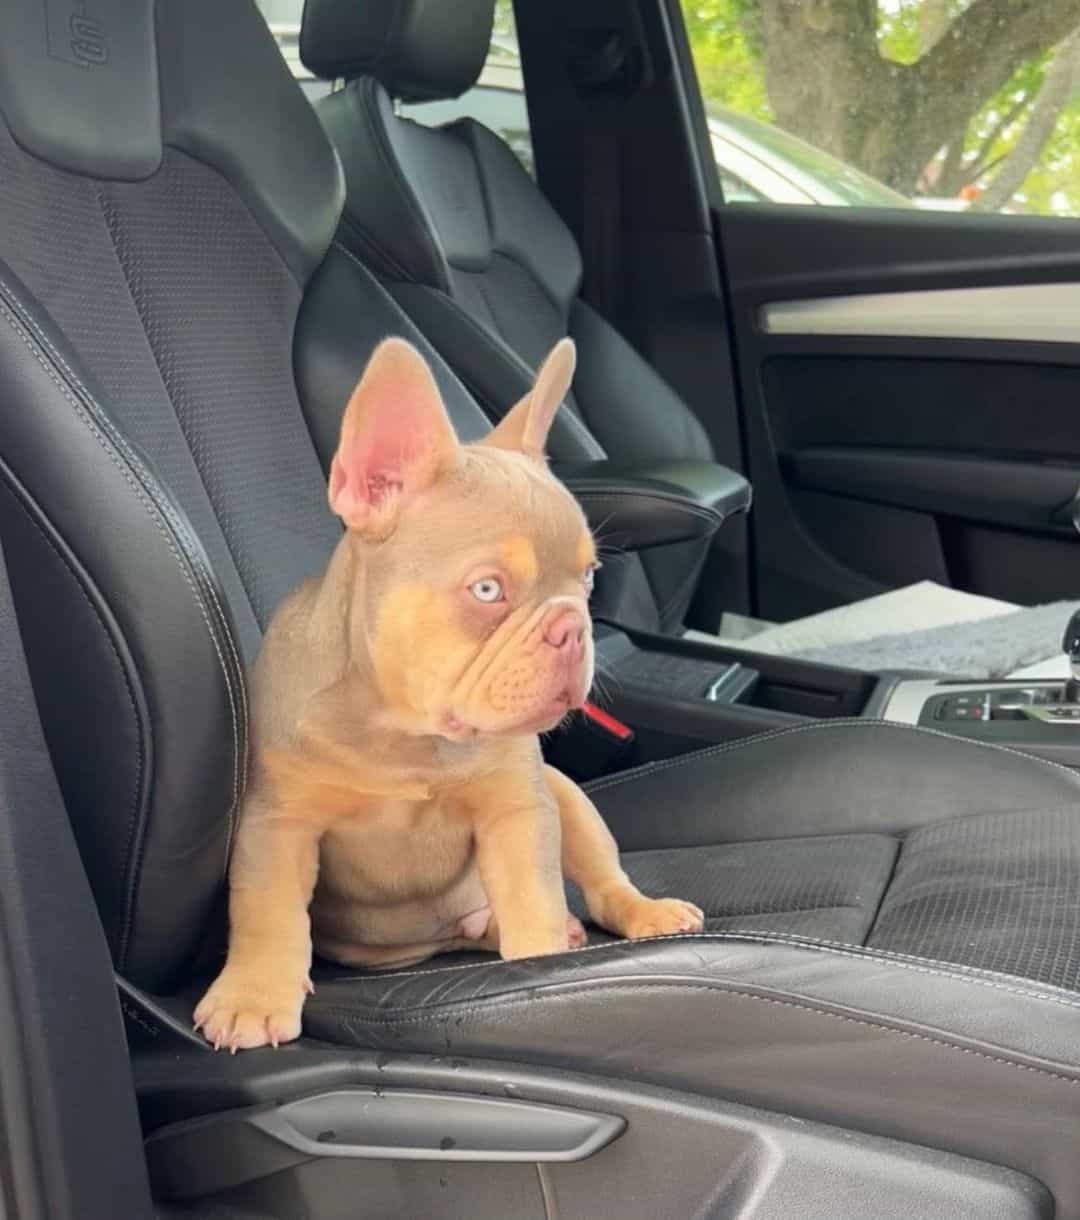 Isabella the French bulldog is sitting on the car seat